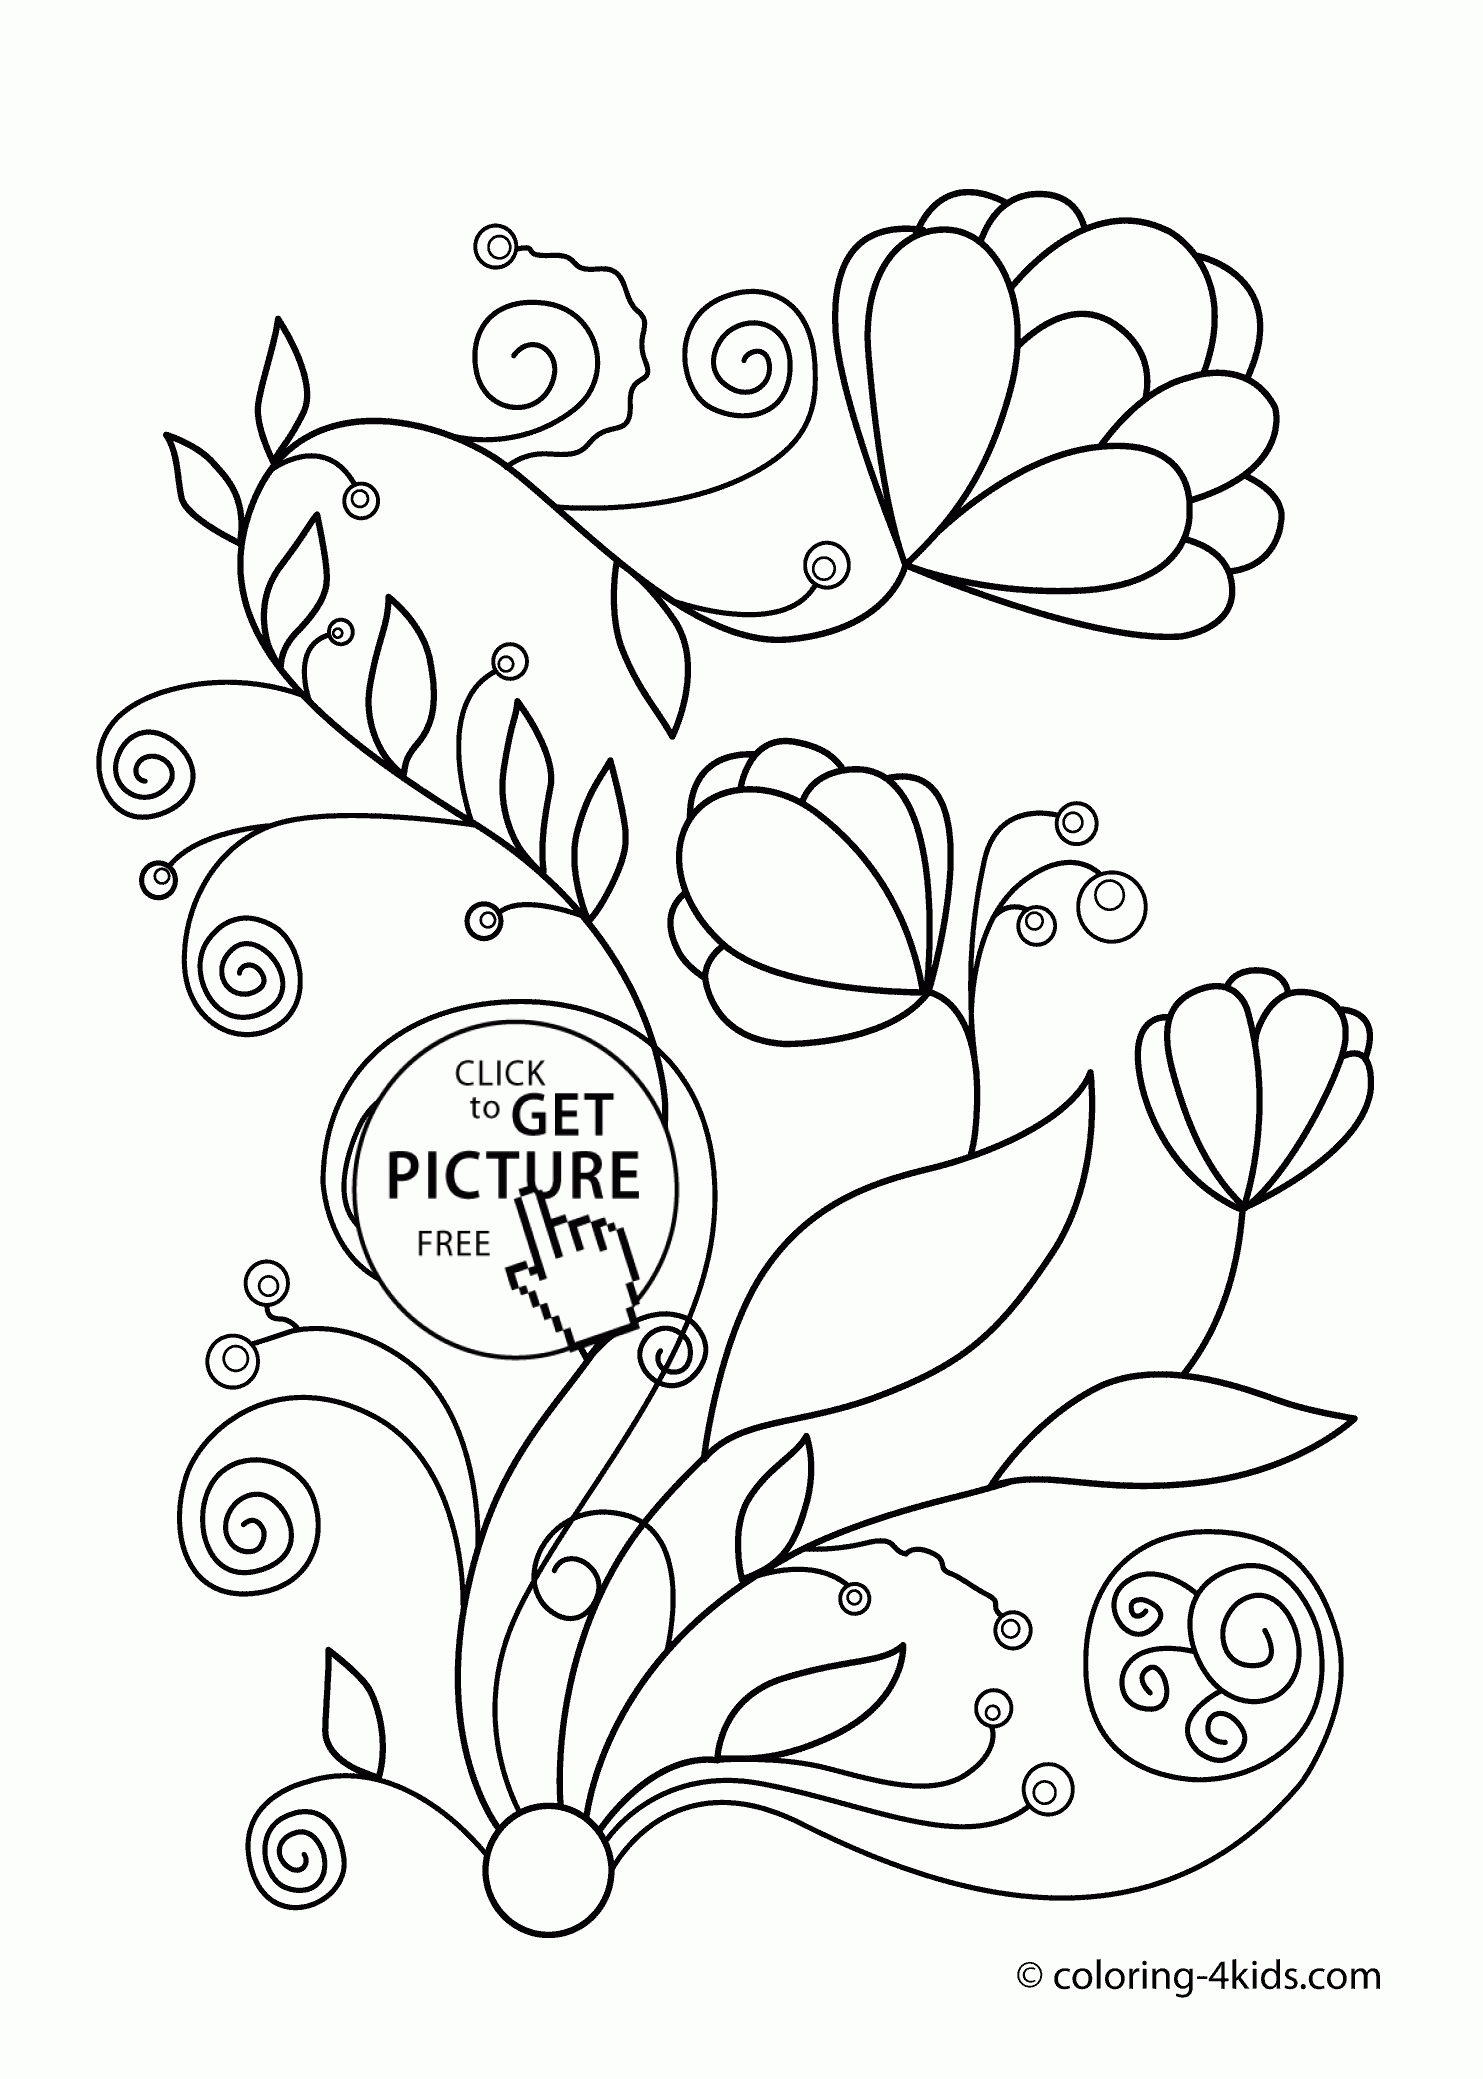 Flowers Coloring Pages, Free Printable Colored Books With Flowers - Free Printable Flower Coloring Pages